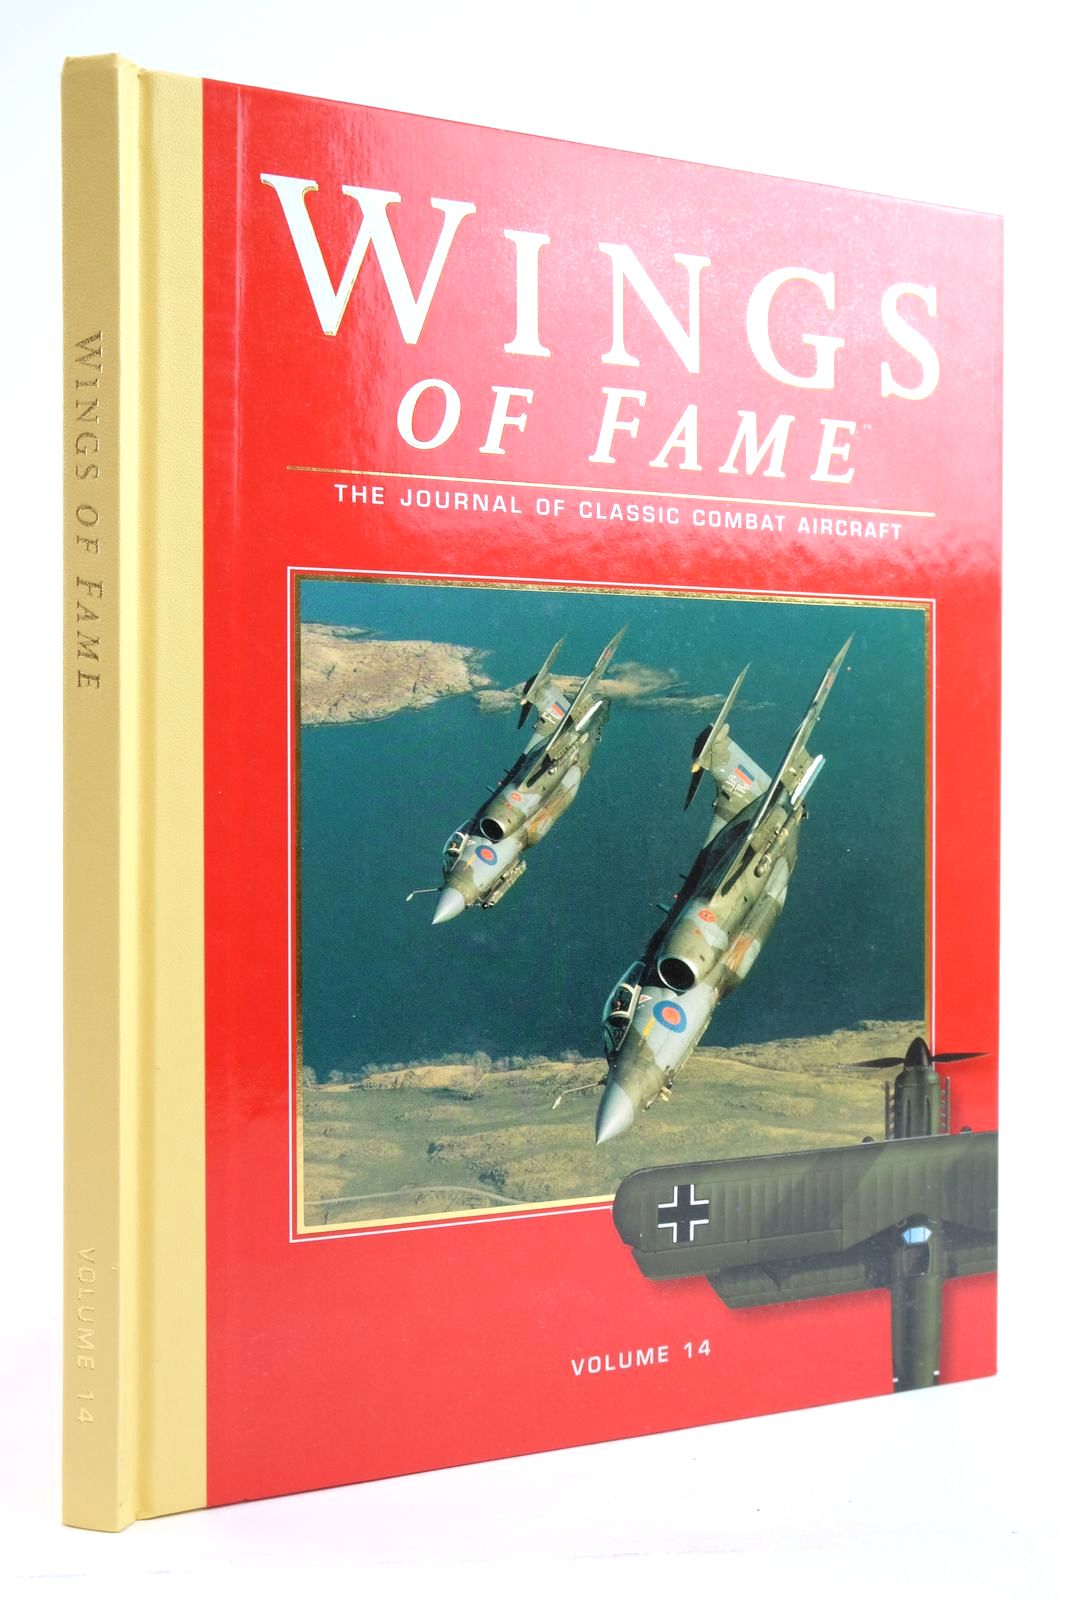 Photo of WINGS OF FAME VOLUME 14 published by Aerospace (STOCK CODE: 2135120)  for sale by Stella & Rose's Books